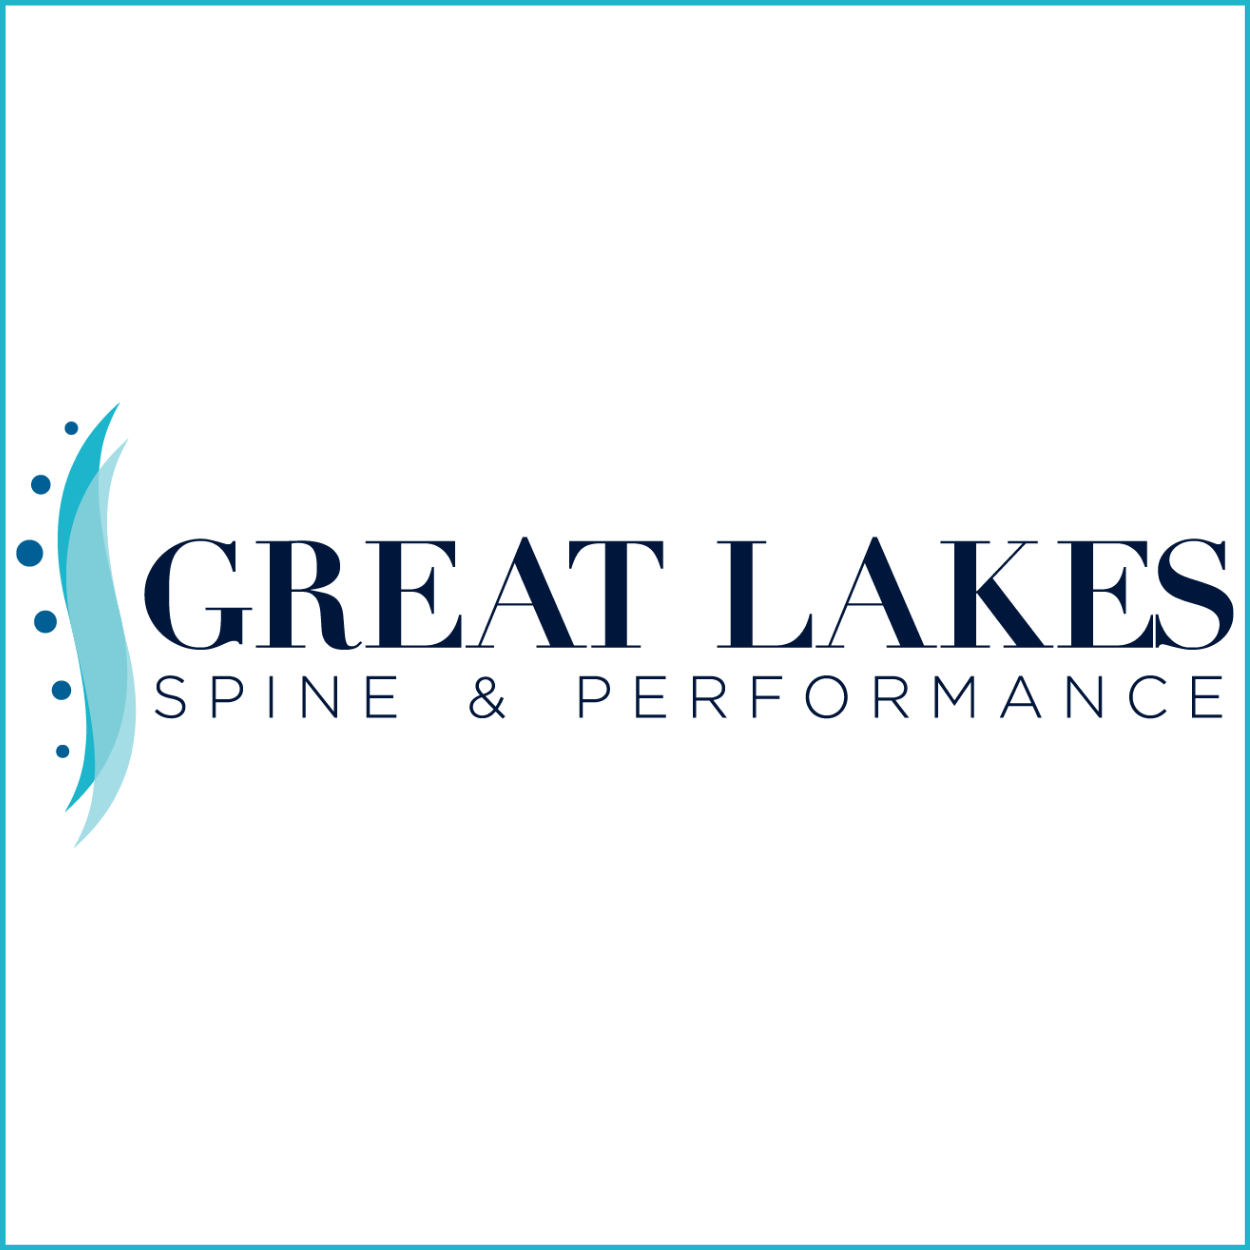 Great Lakes Spine & Performance